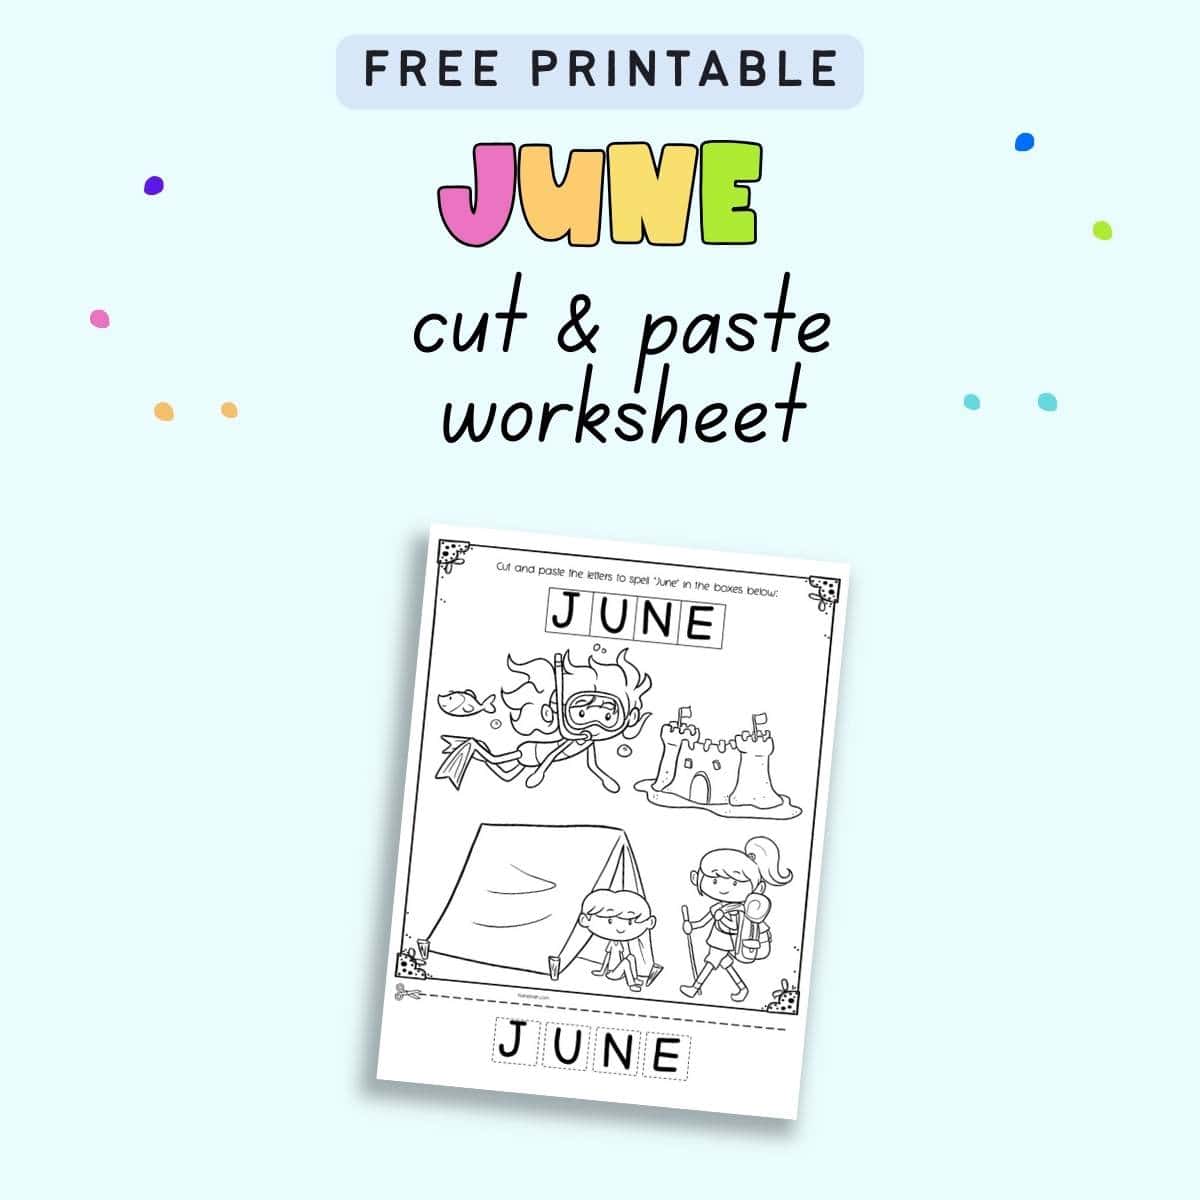 Text "free printable June cut and paste worksheet" with a preview of a coloring page with the letters for JUNE to cut and paste.